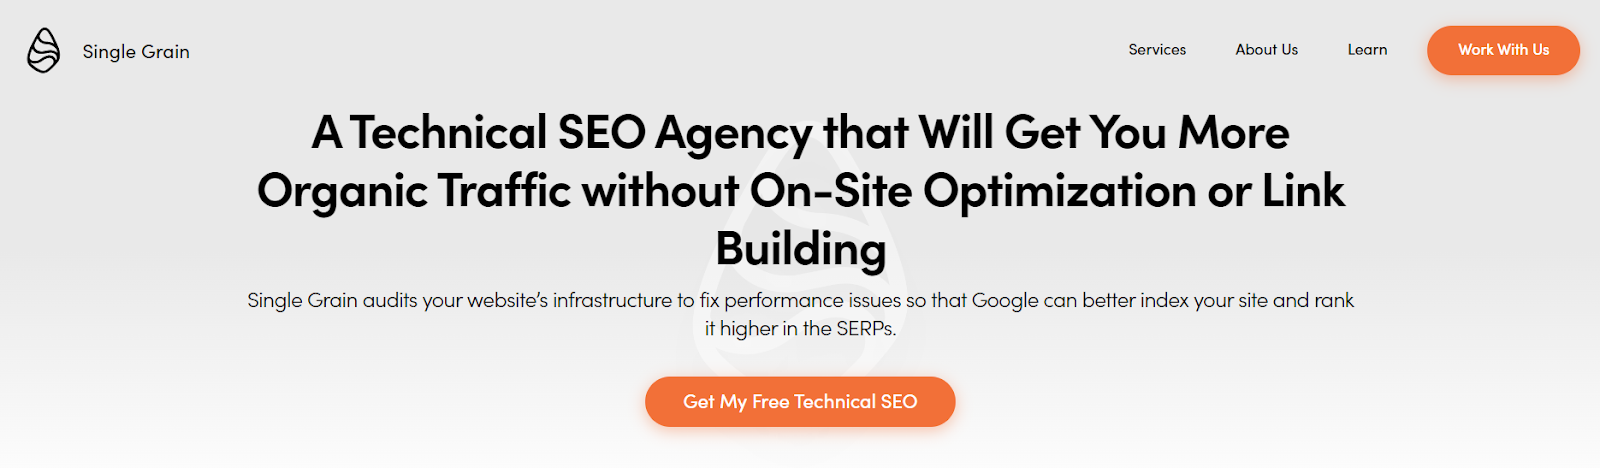 SingleGrain listed as one of the 15 Best SEO Companies for Multi-Unit Businesses
